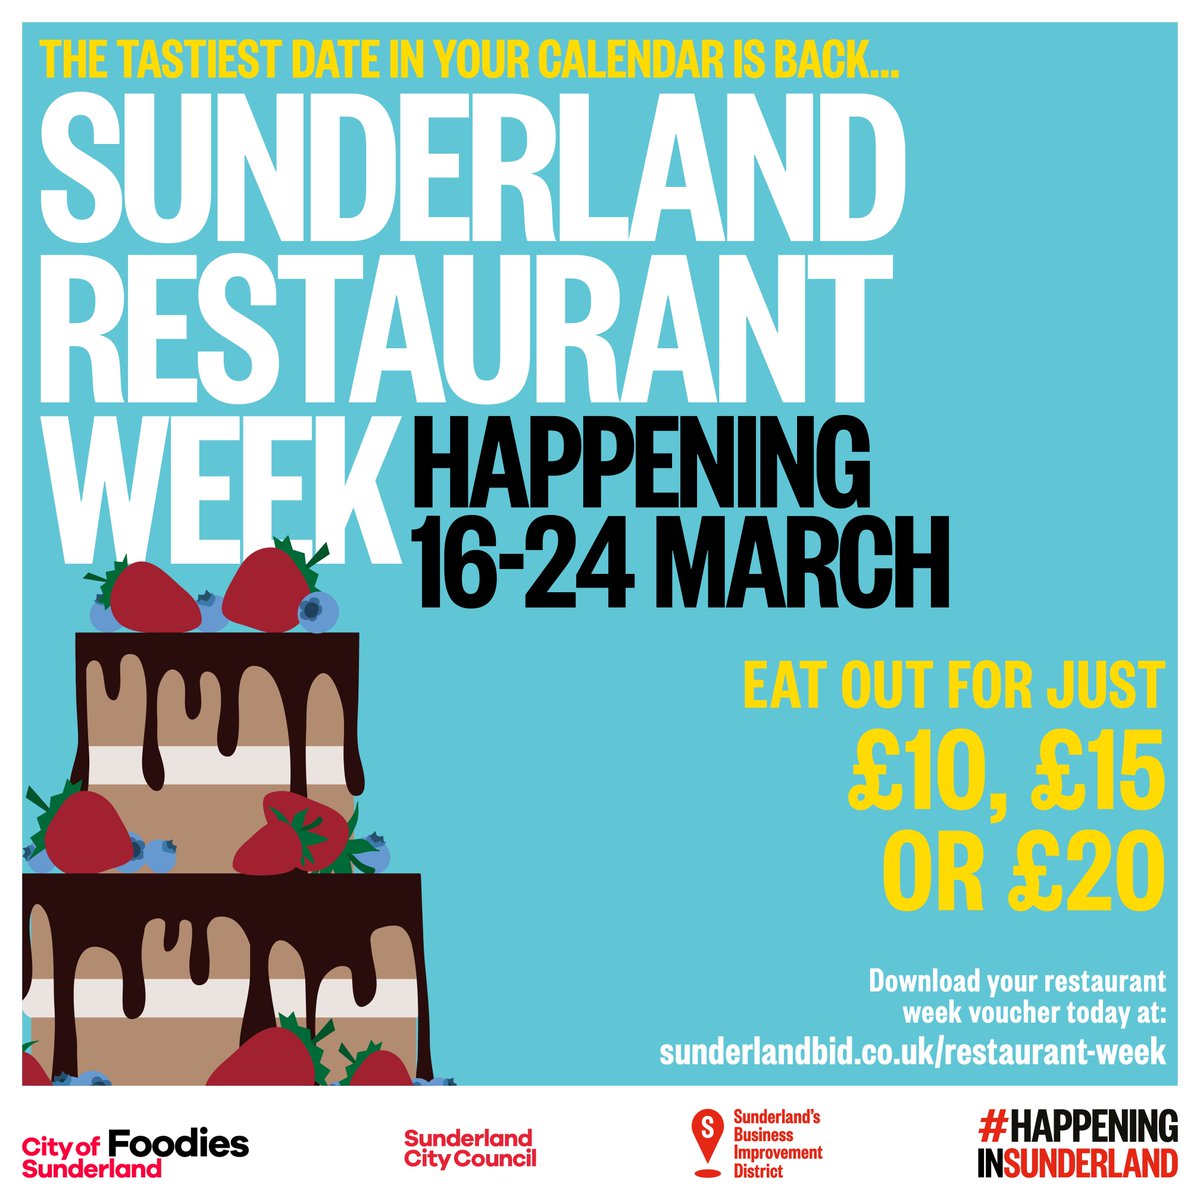 Whether you're a local or a visitor, Sunderland Restaurant Week is your chance to experience the city's culinary treasures. #HappeningInSunderland from 16 to 24 March! 📆  

More info 👉  orlo.uk/JdXga

#SunderlandExperience #SunderlandRestaurantWeek